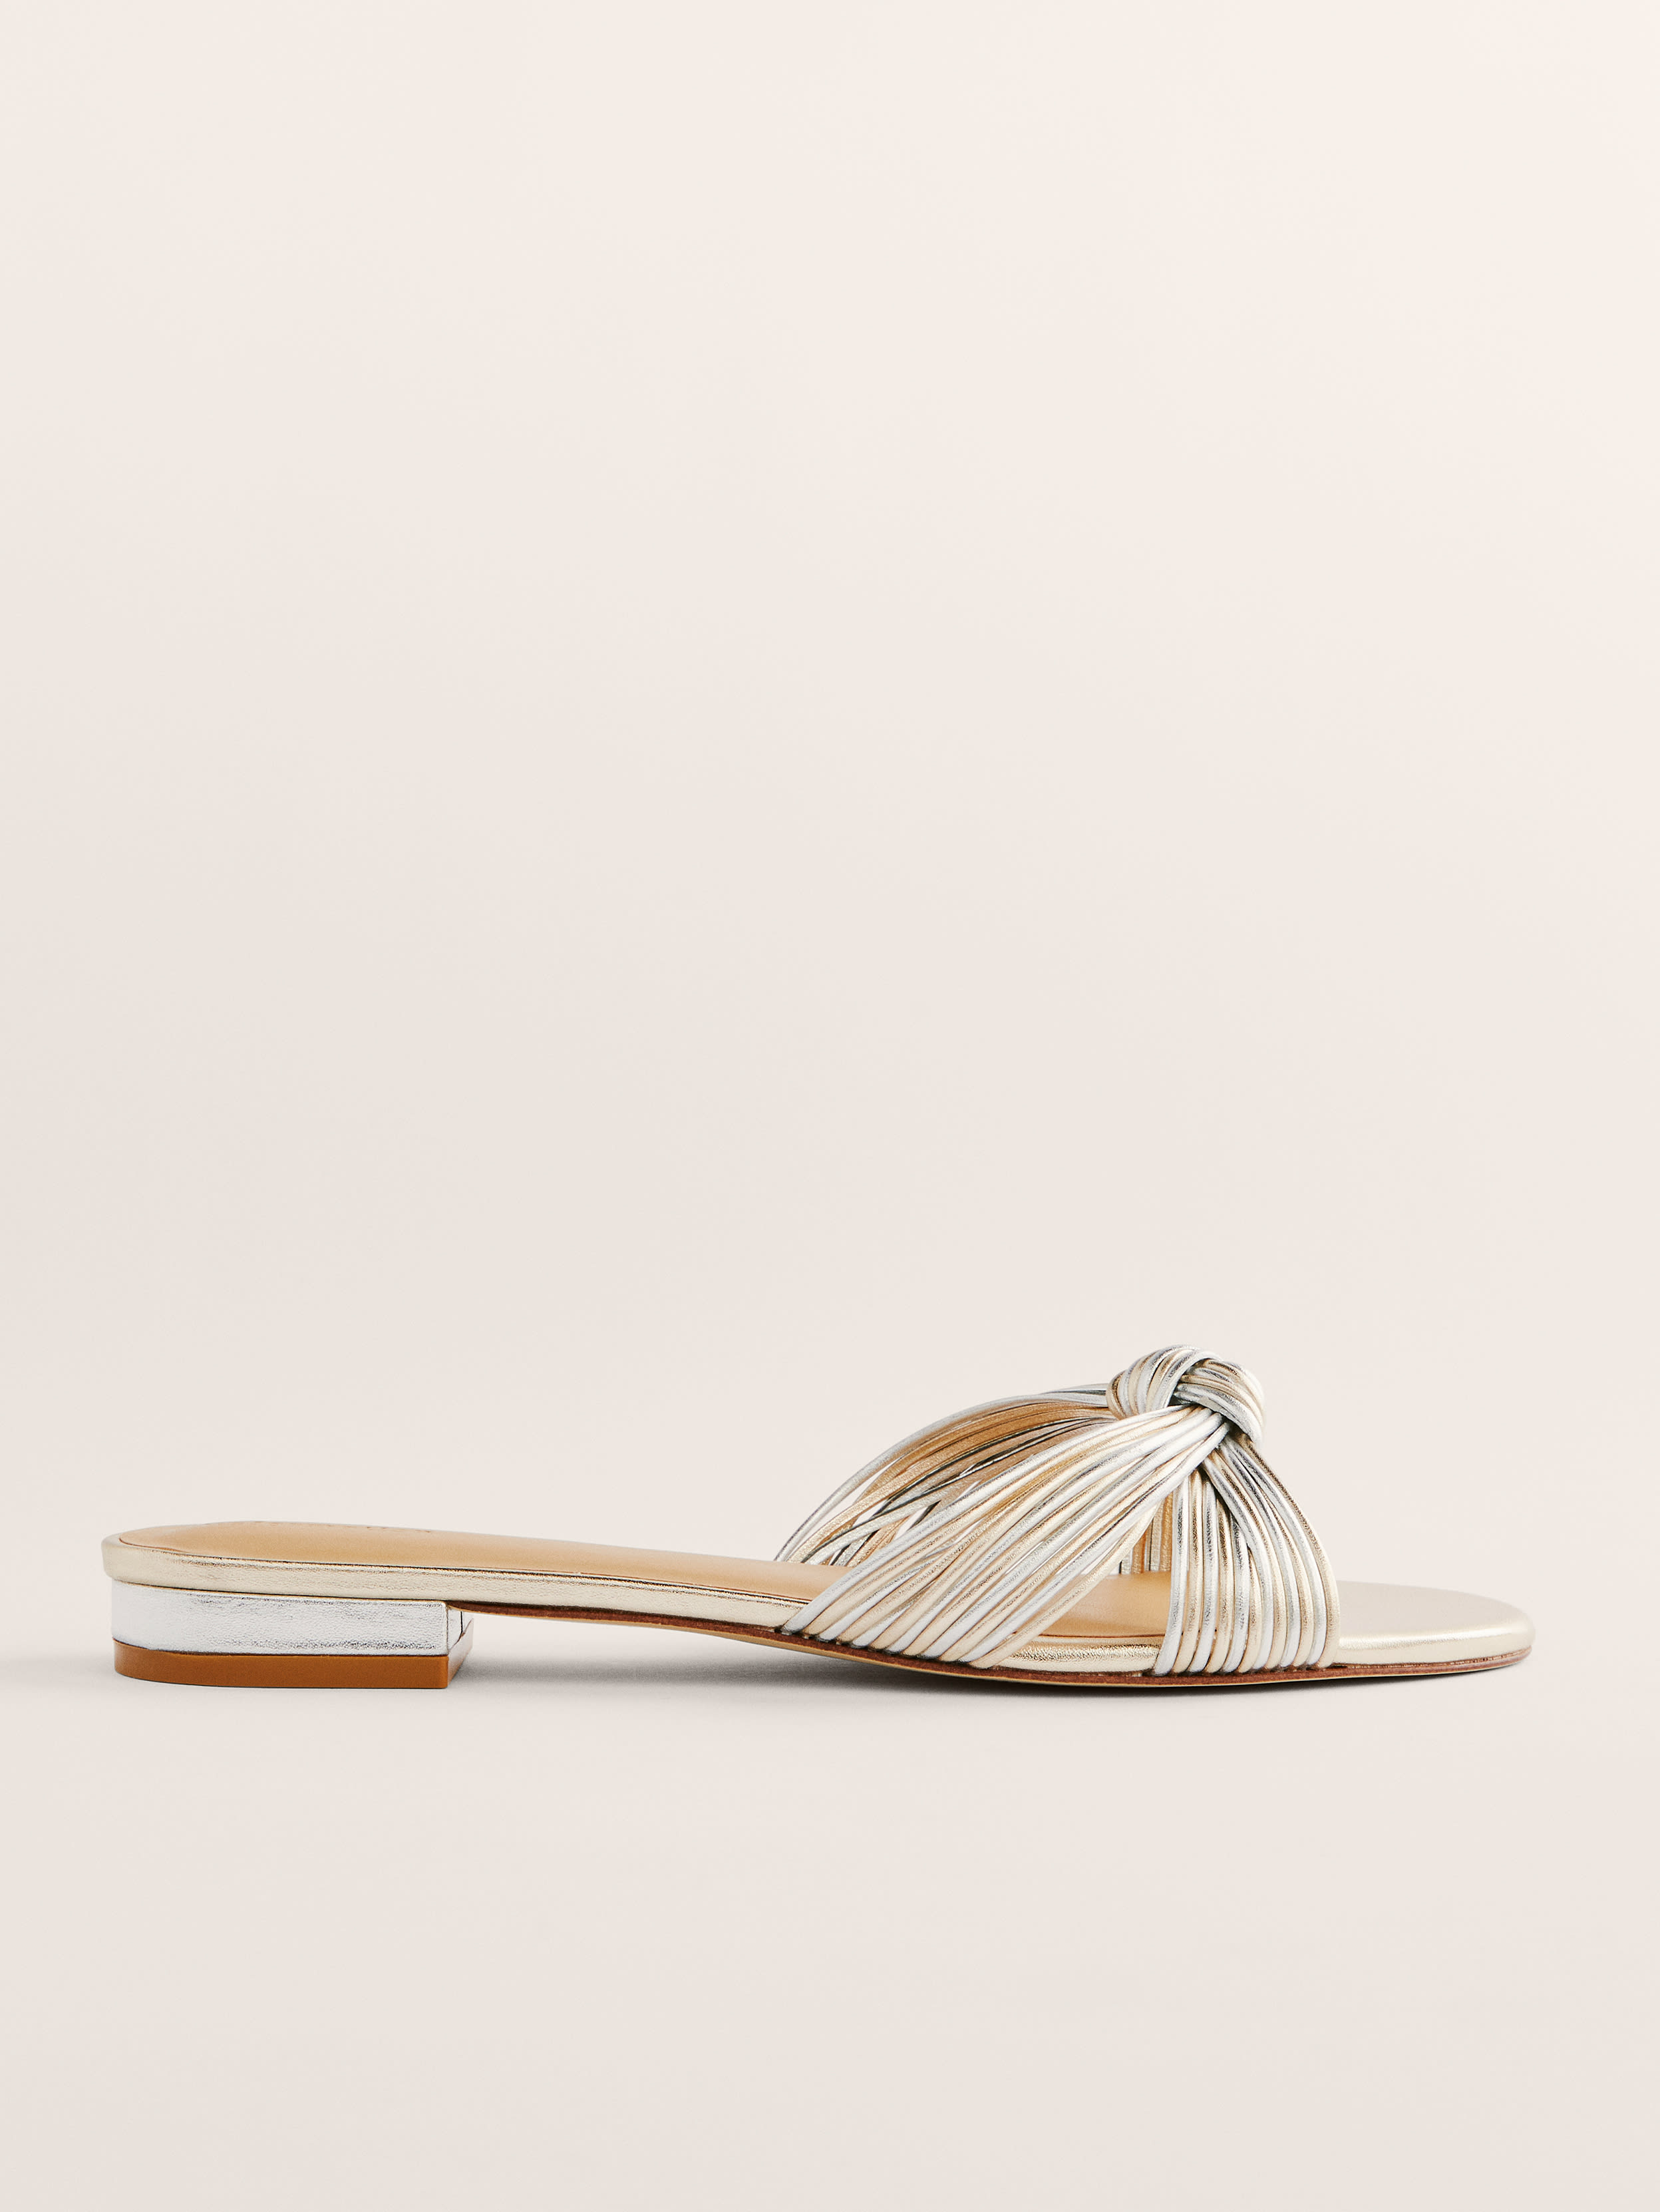 Reformation Peridot Mignon Knot Flat Sandal In Silver